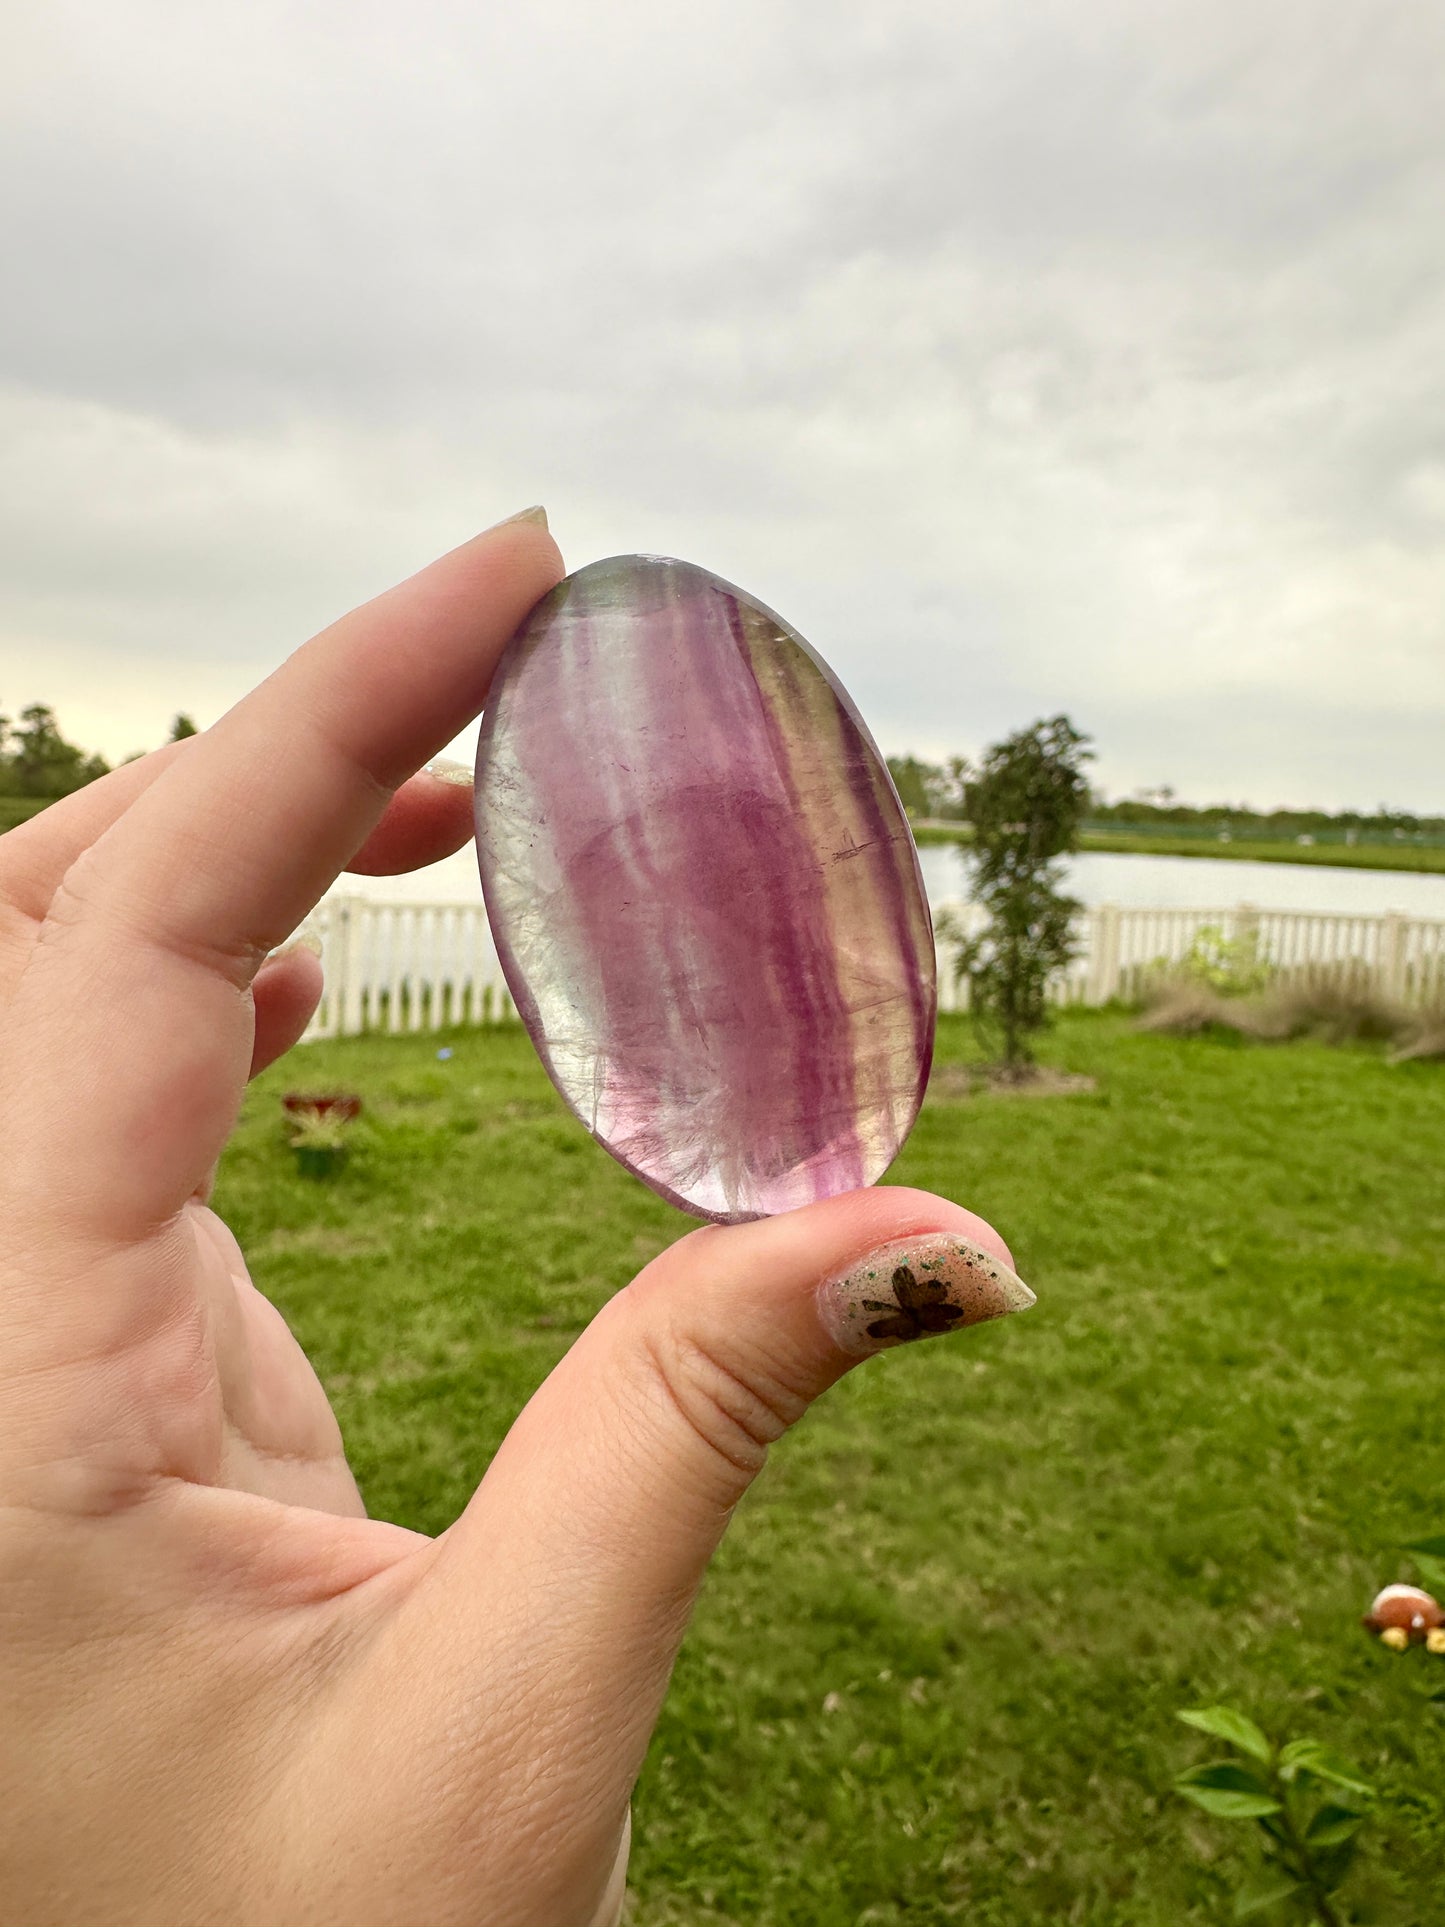 Exquisite Fluorite Palm Stone for Clarity and Protection, Enhance Focus with Vibrant Fluorite, Beautiful Gift for Mindfulness and Healing